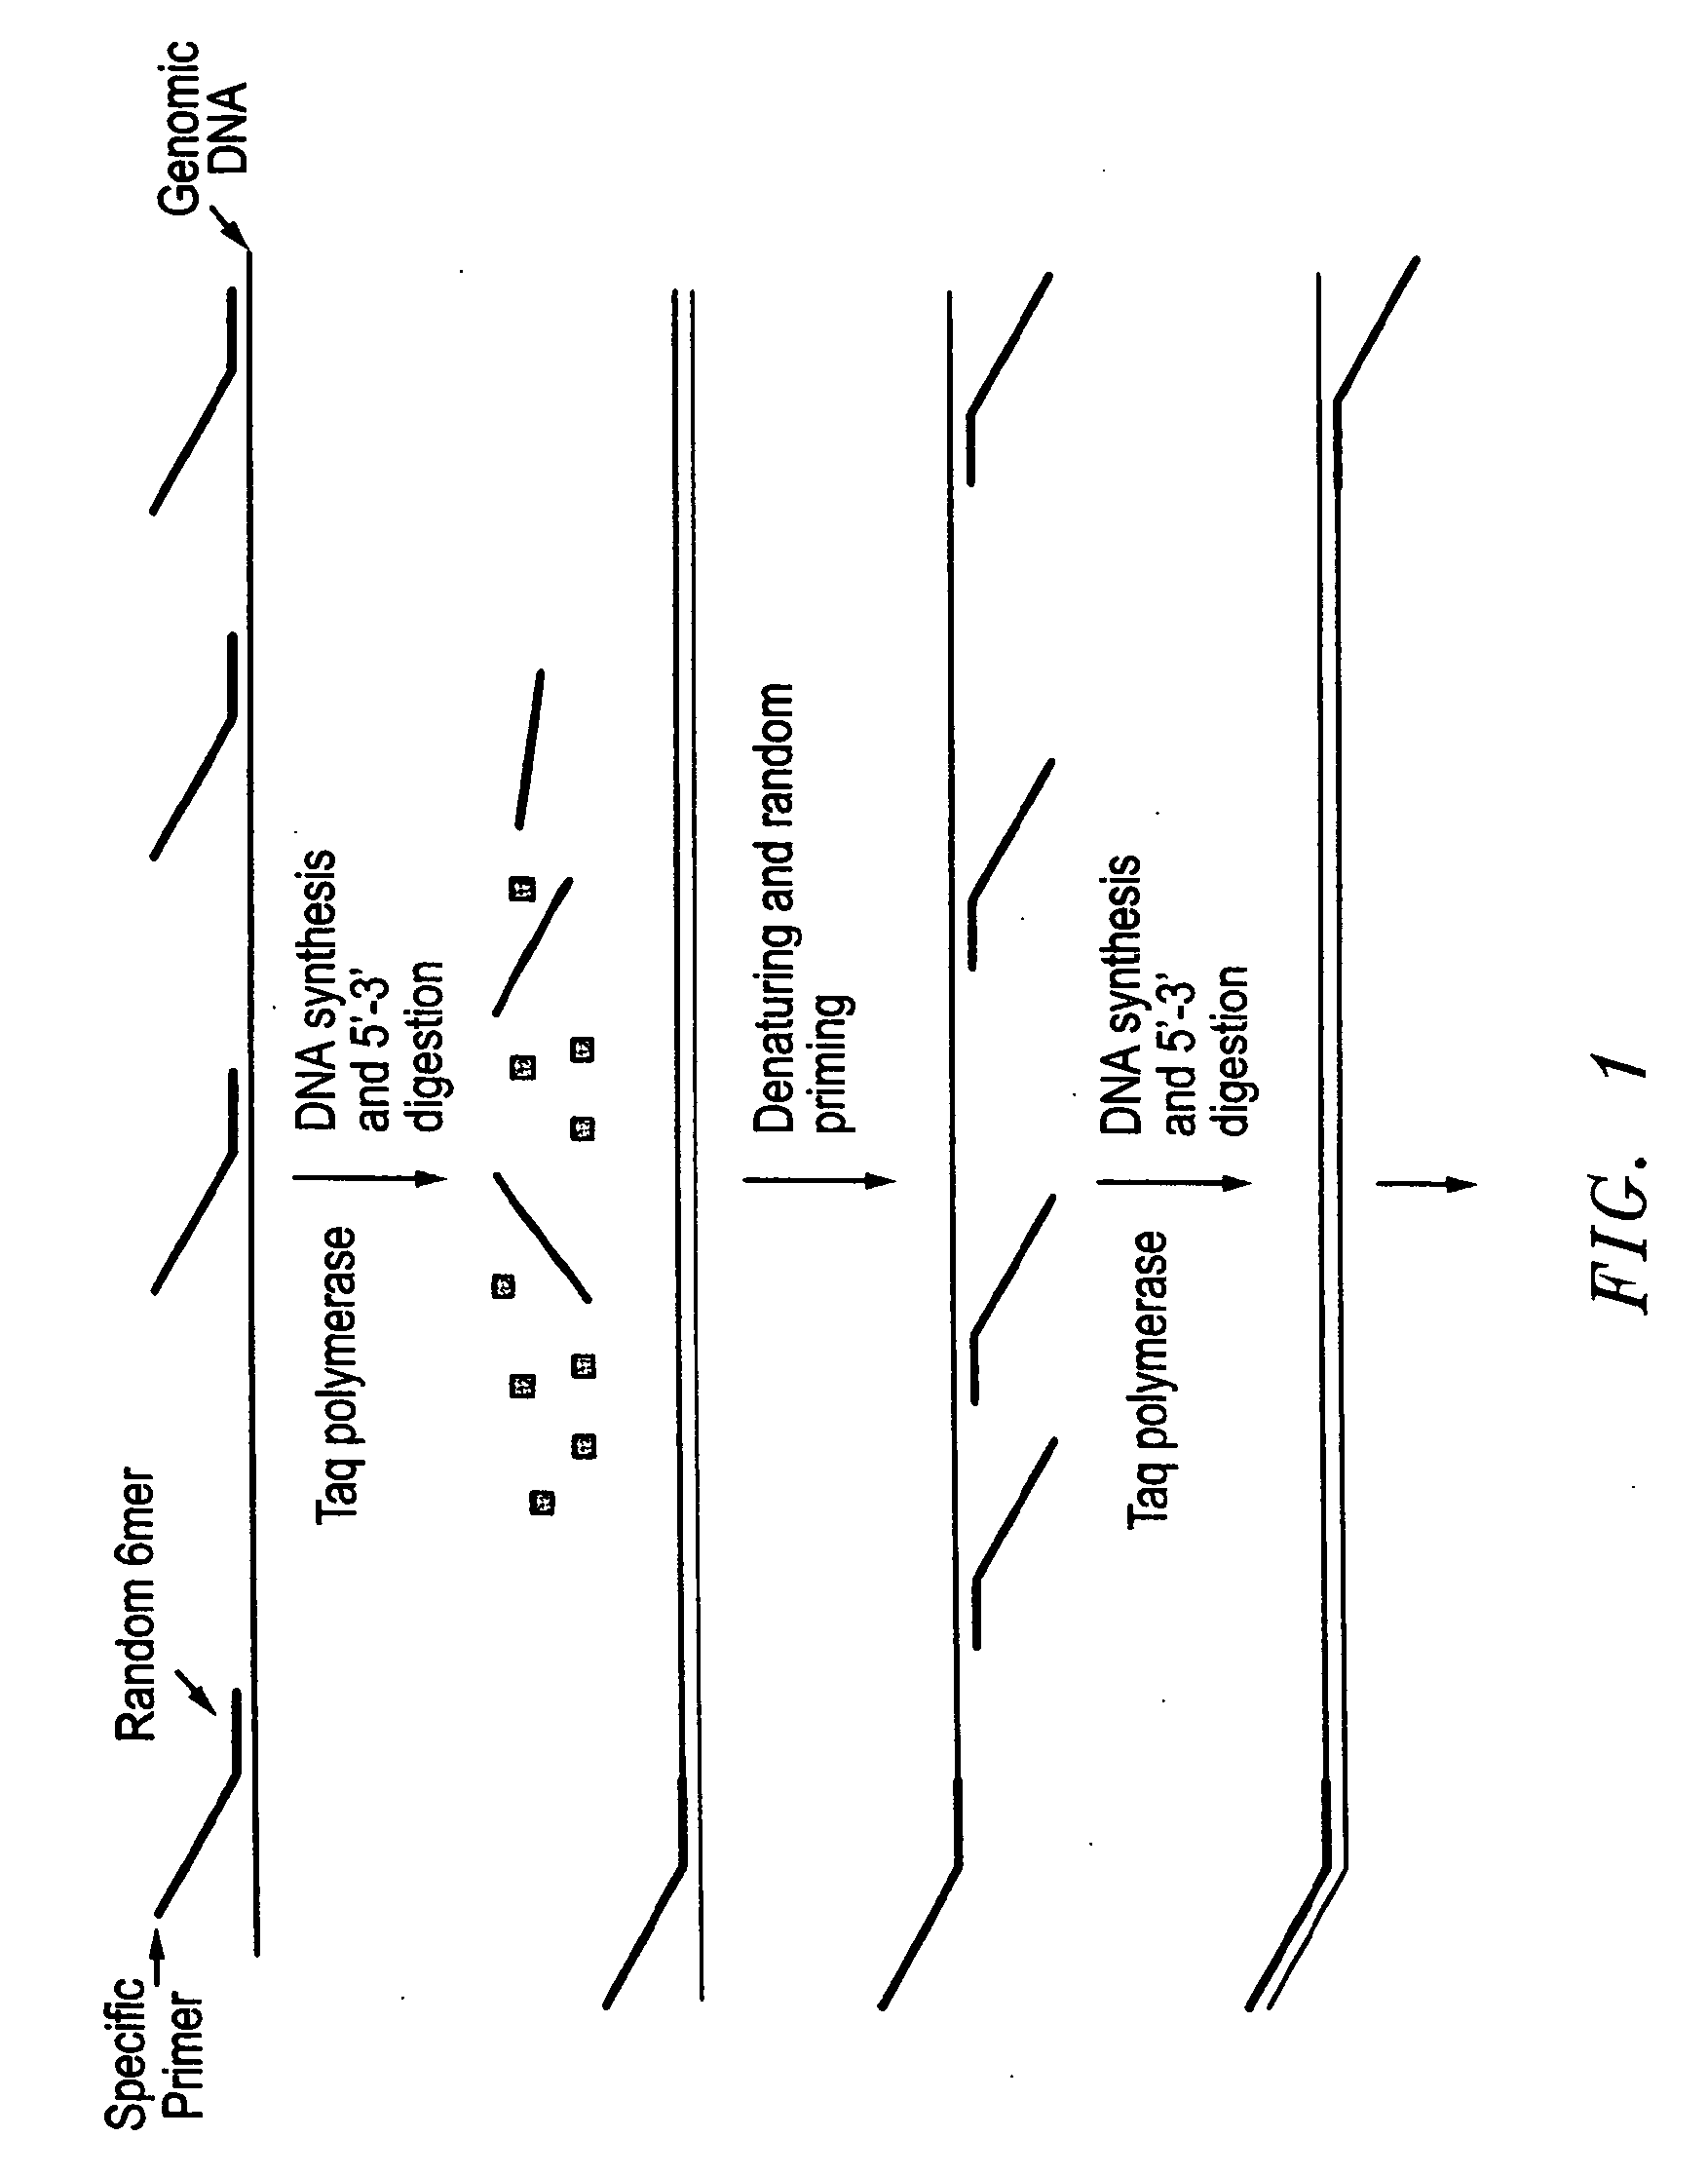 Method for rapid amplification of DNA